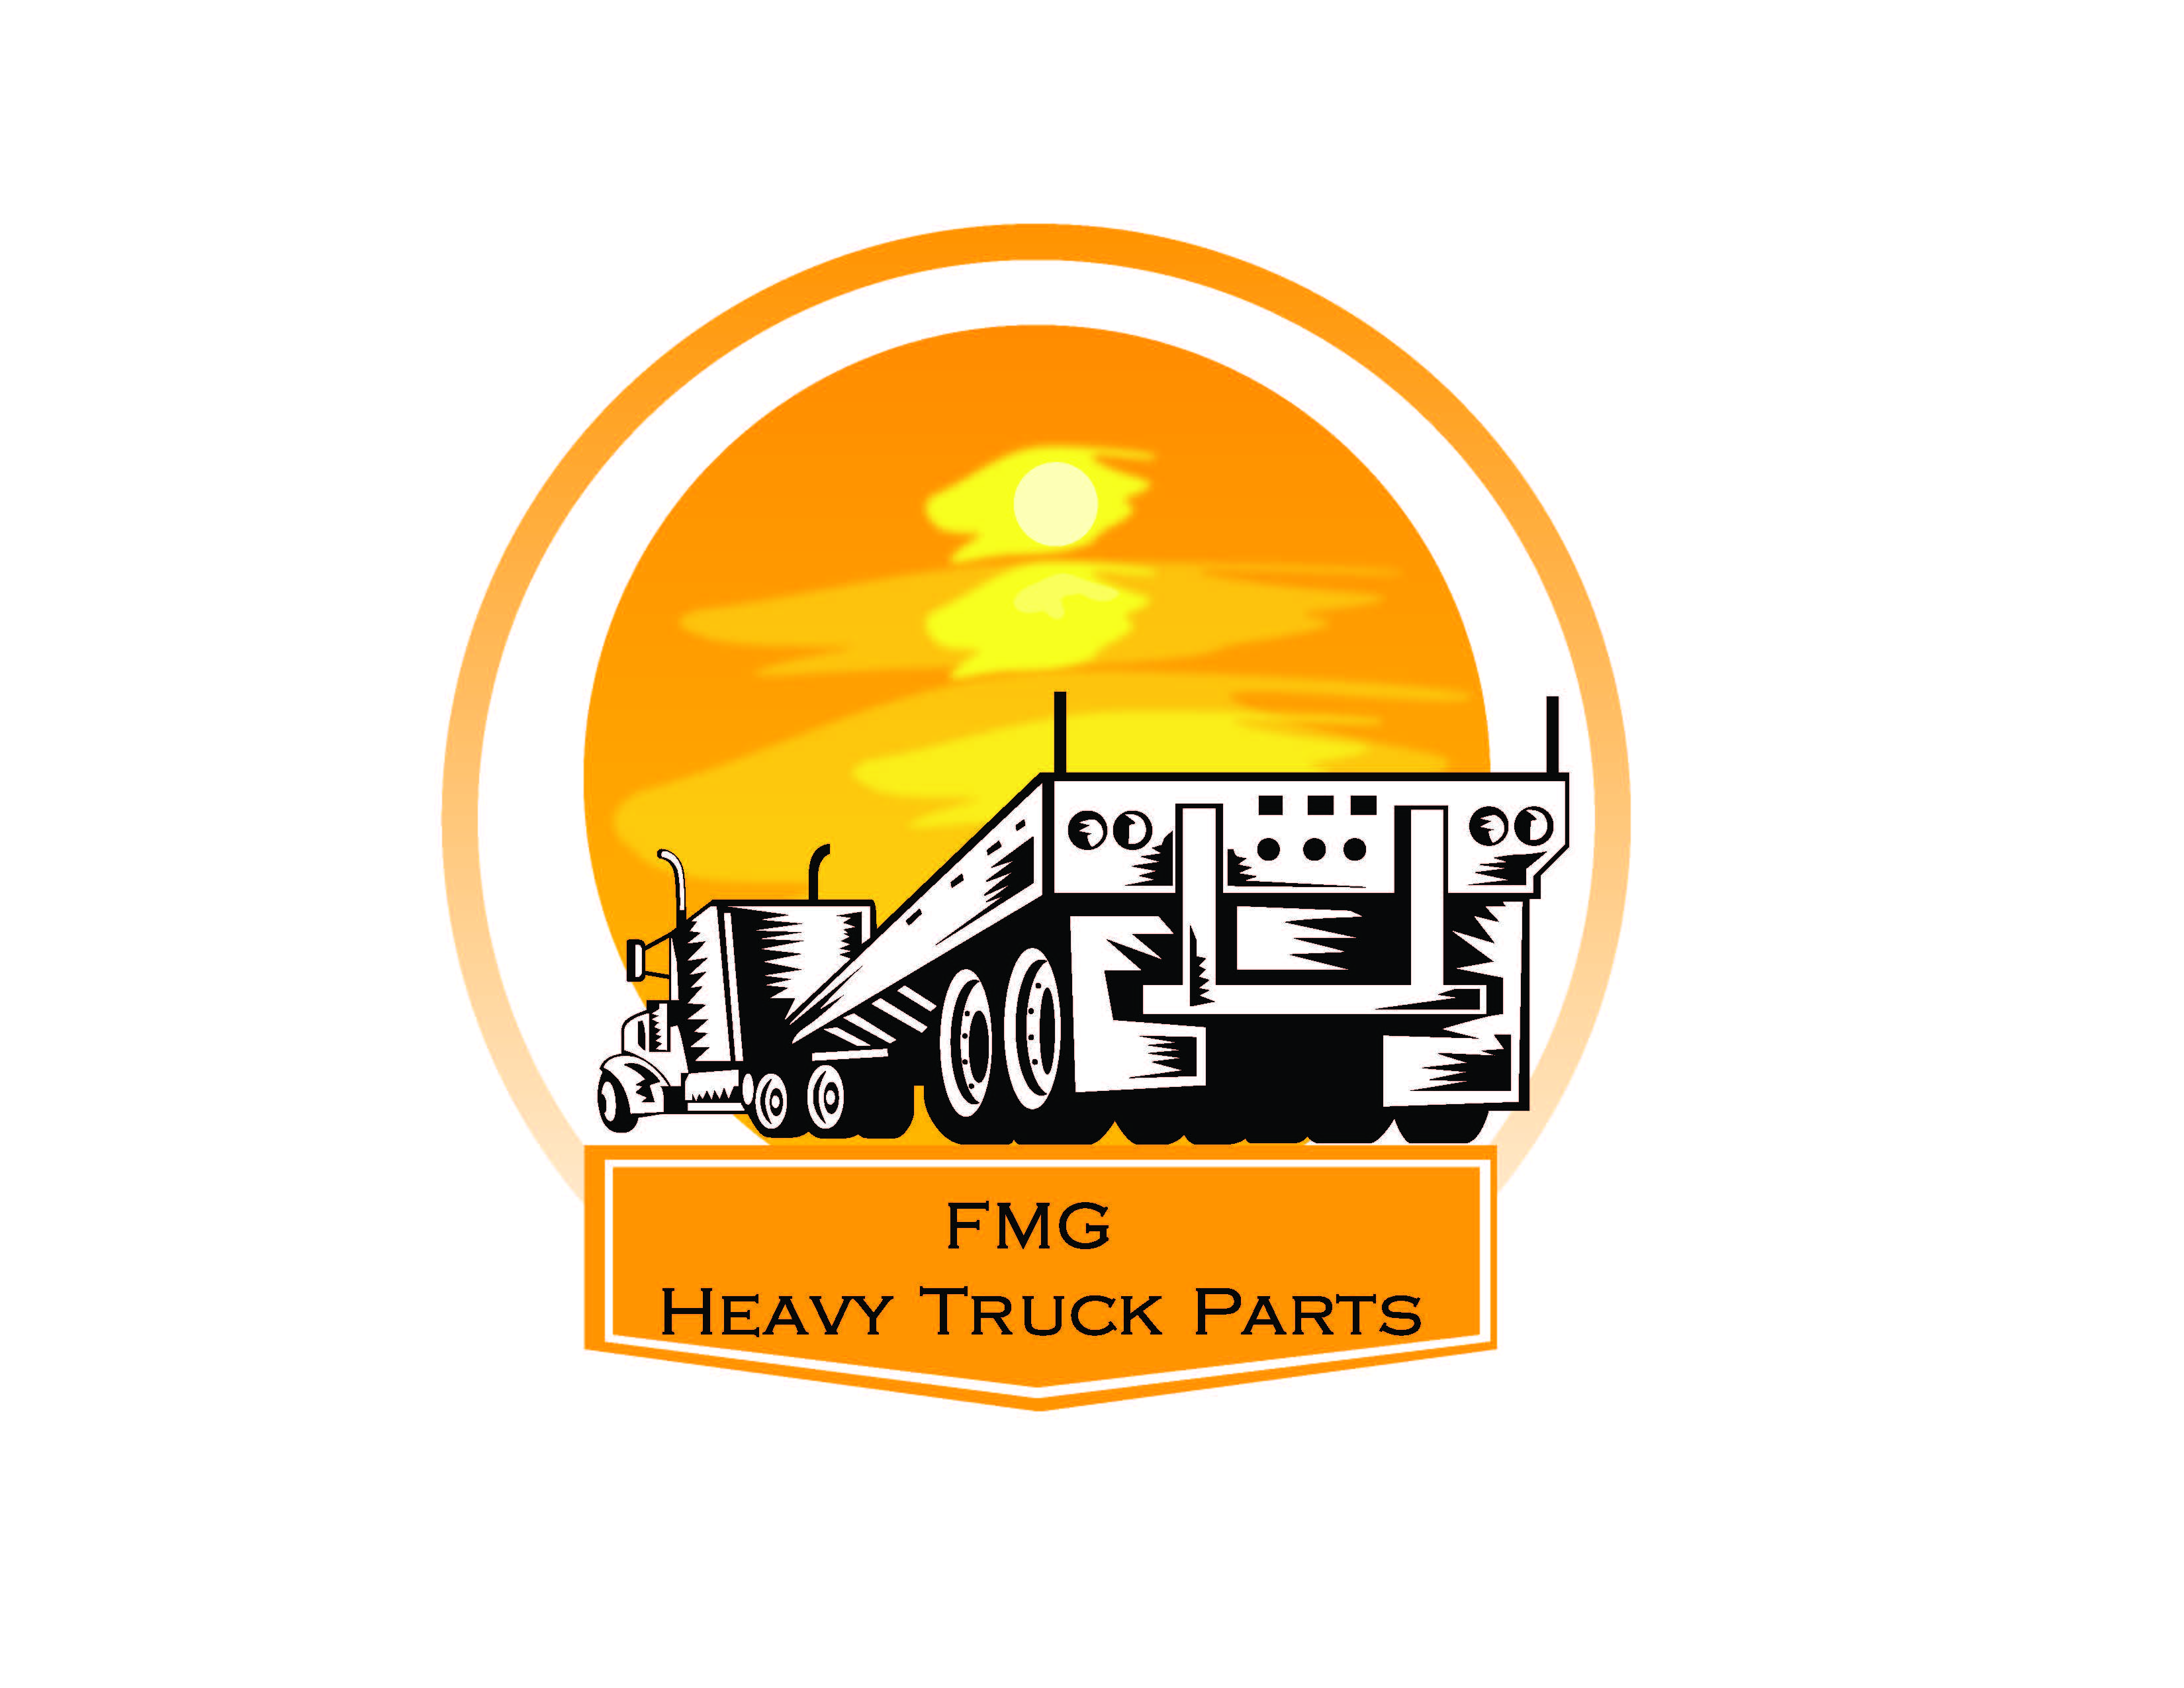 FMG Heavy Truck Parts